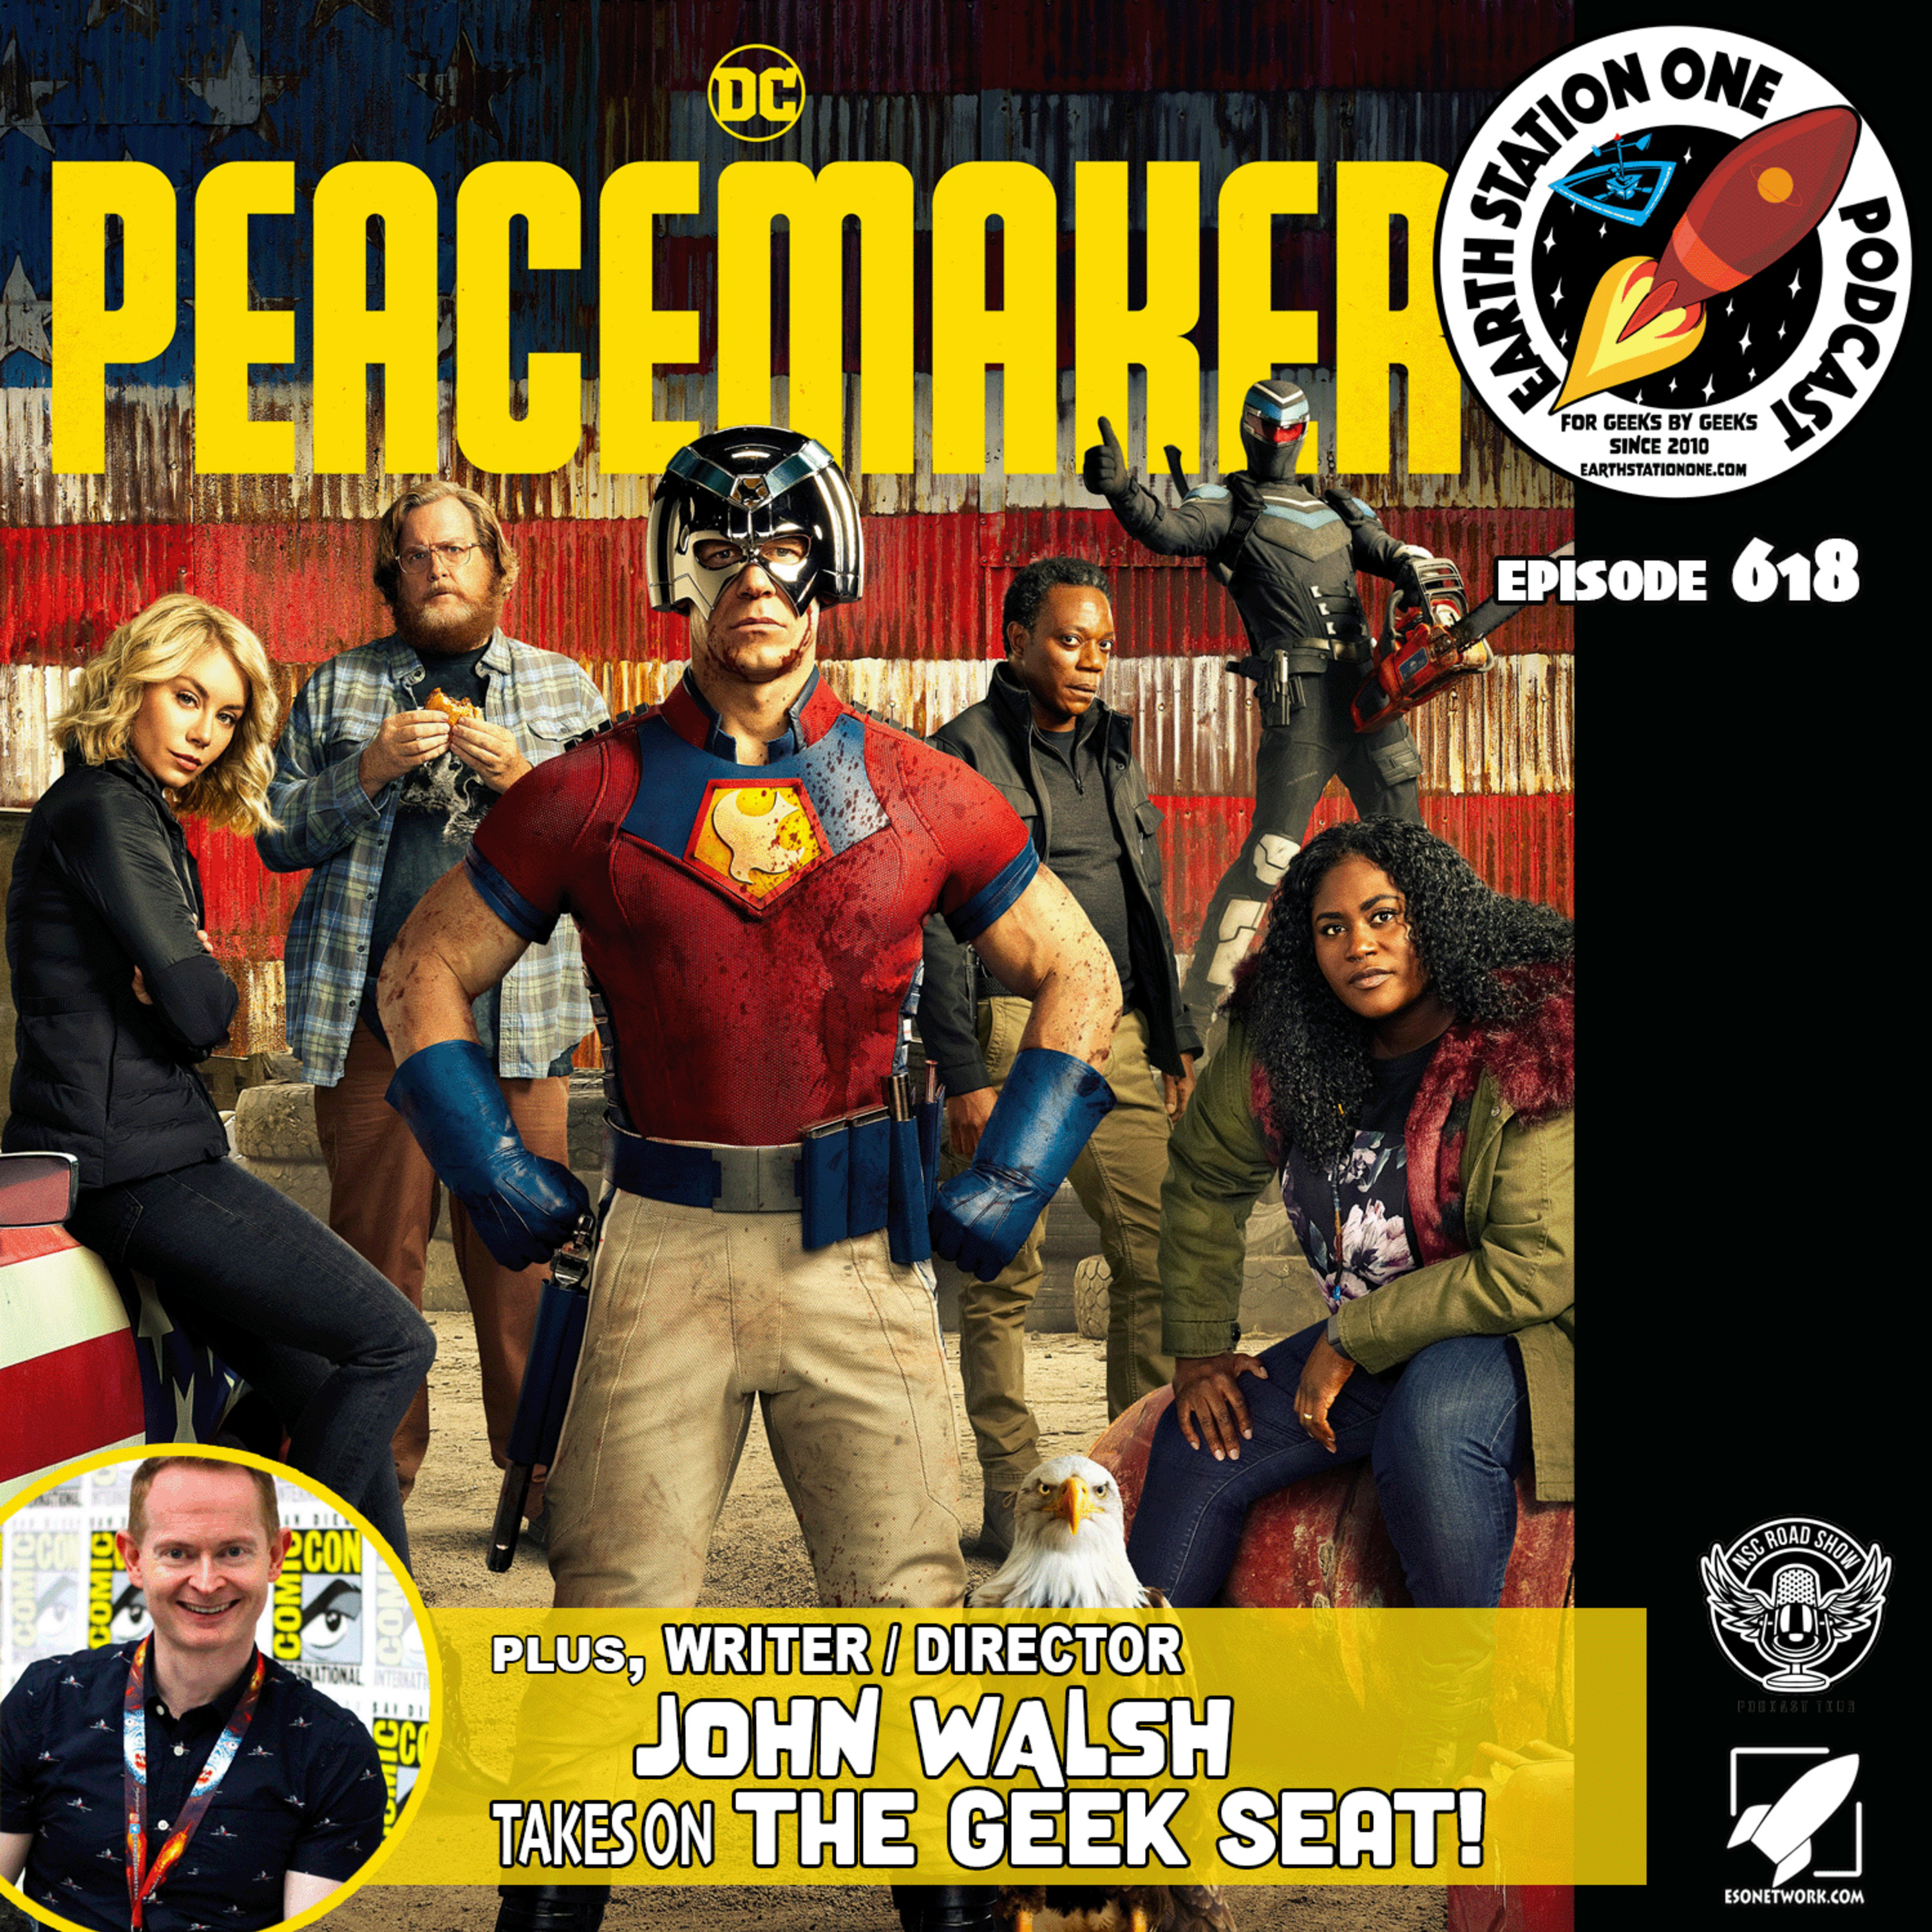 The Earth Station One Podcast - Peacemaker Series Review